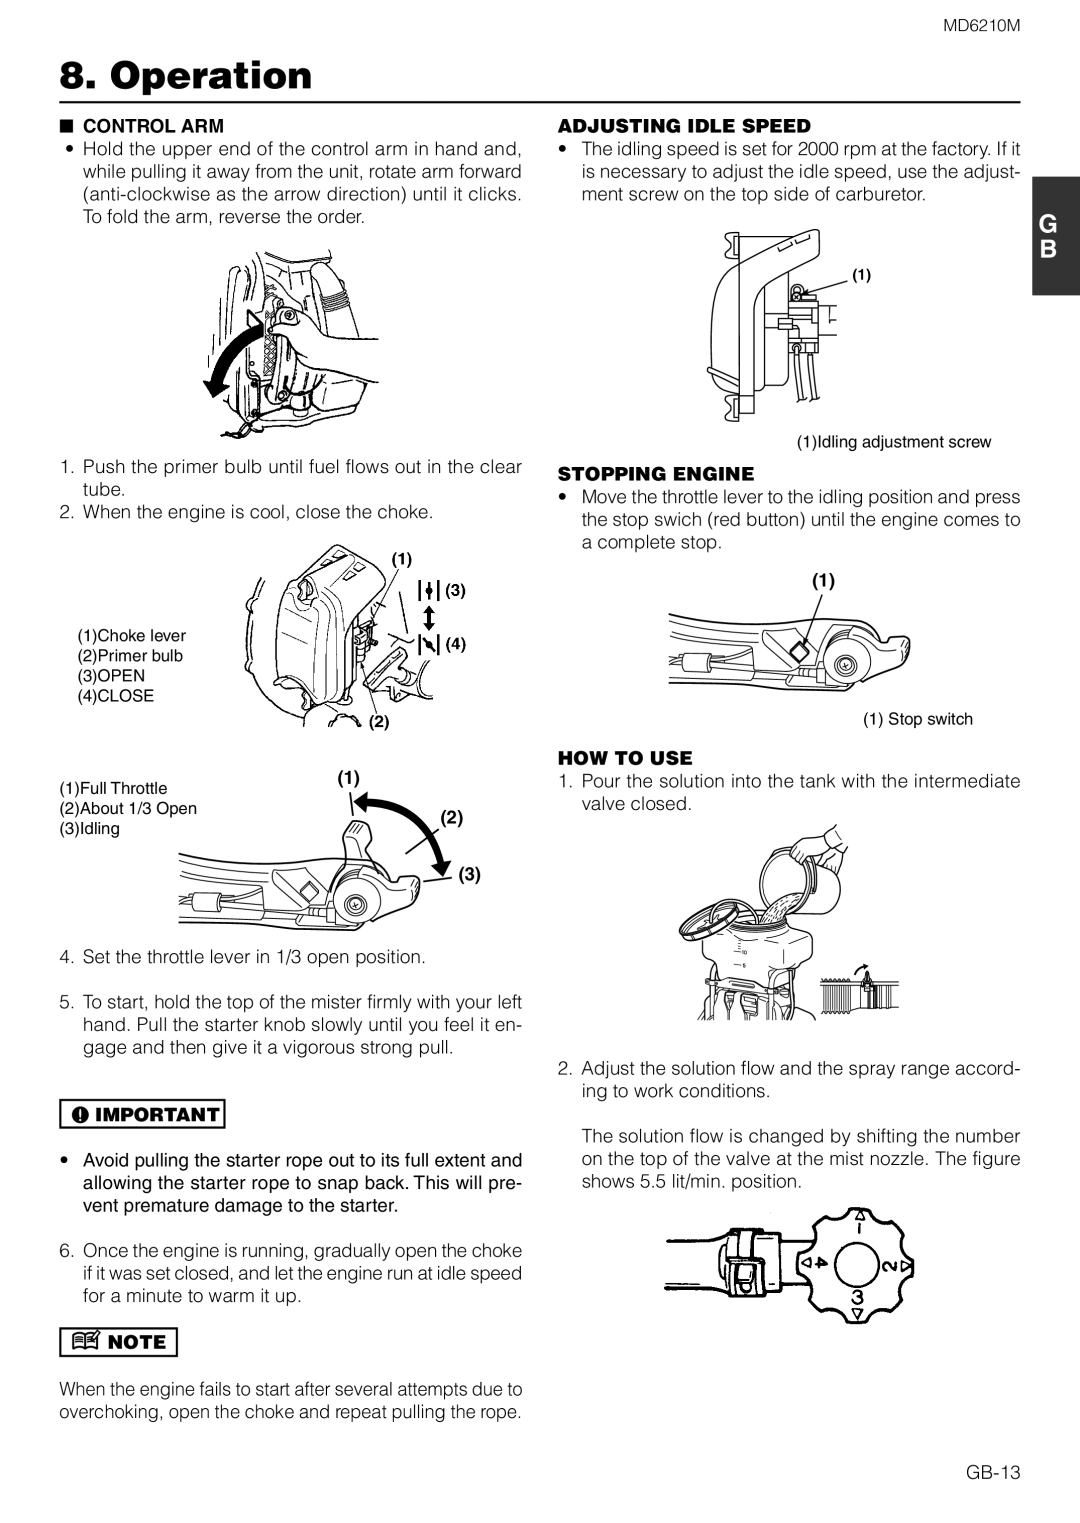 Zenoah MD6210M owner manual Operation, Control Arm, Adjusting Idle Speed, Stopping Engine, How To Use 